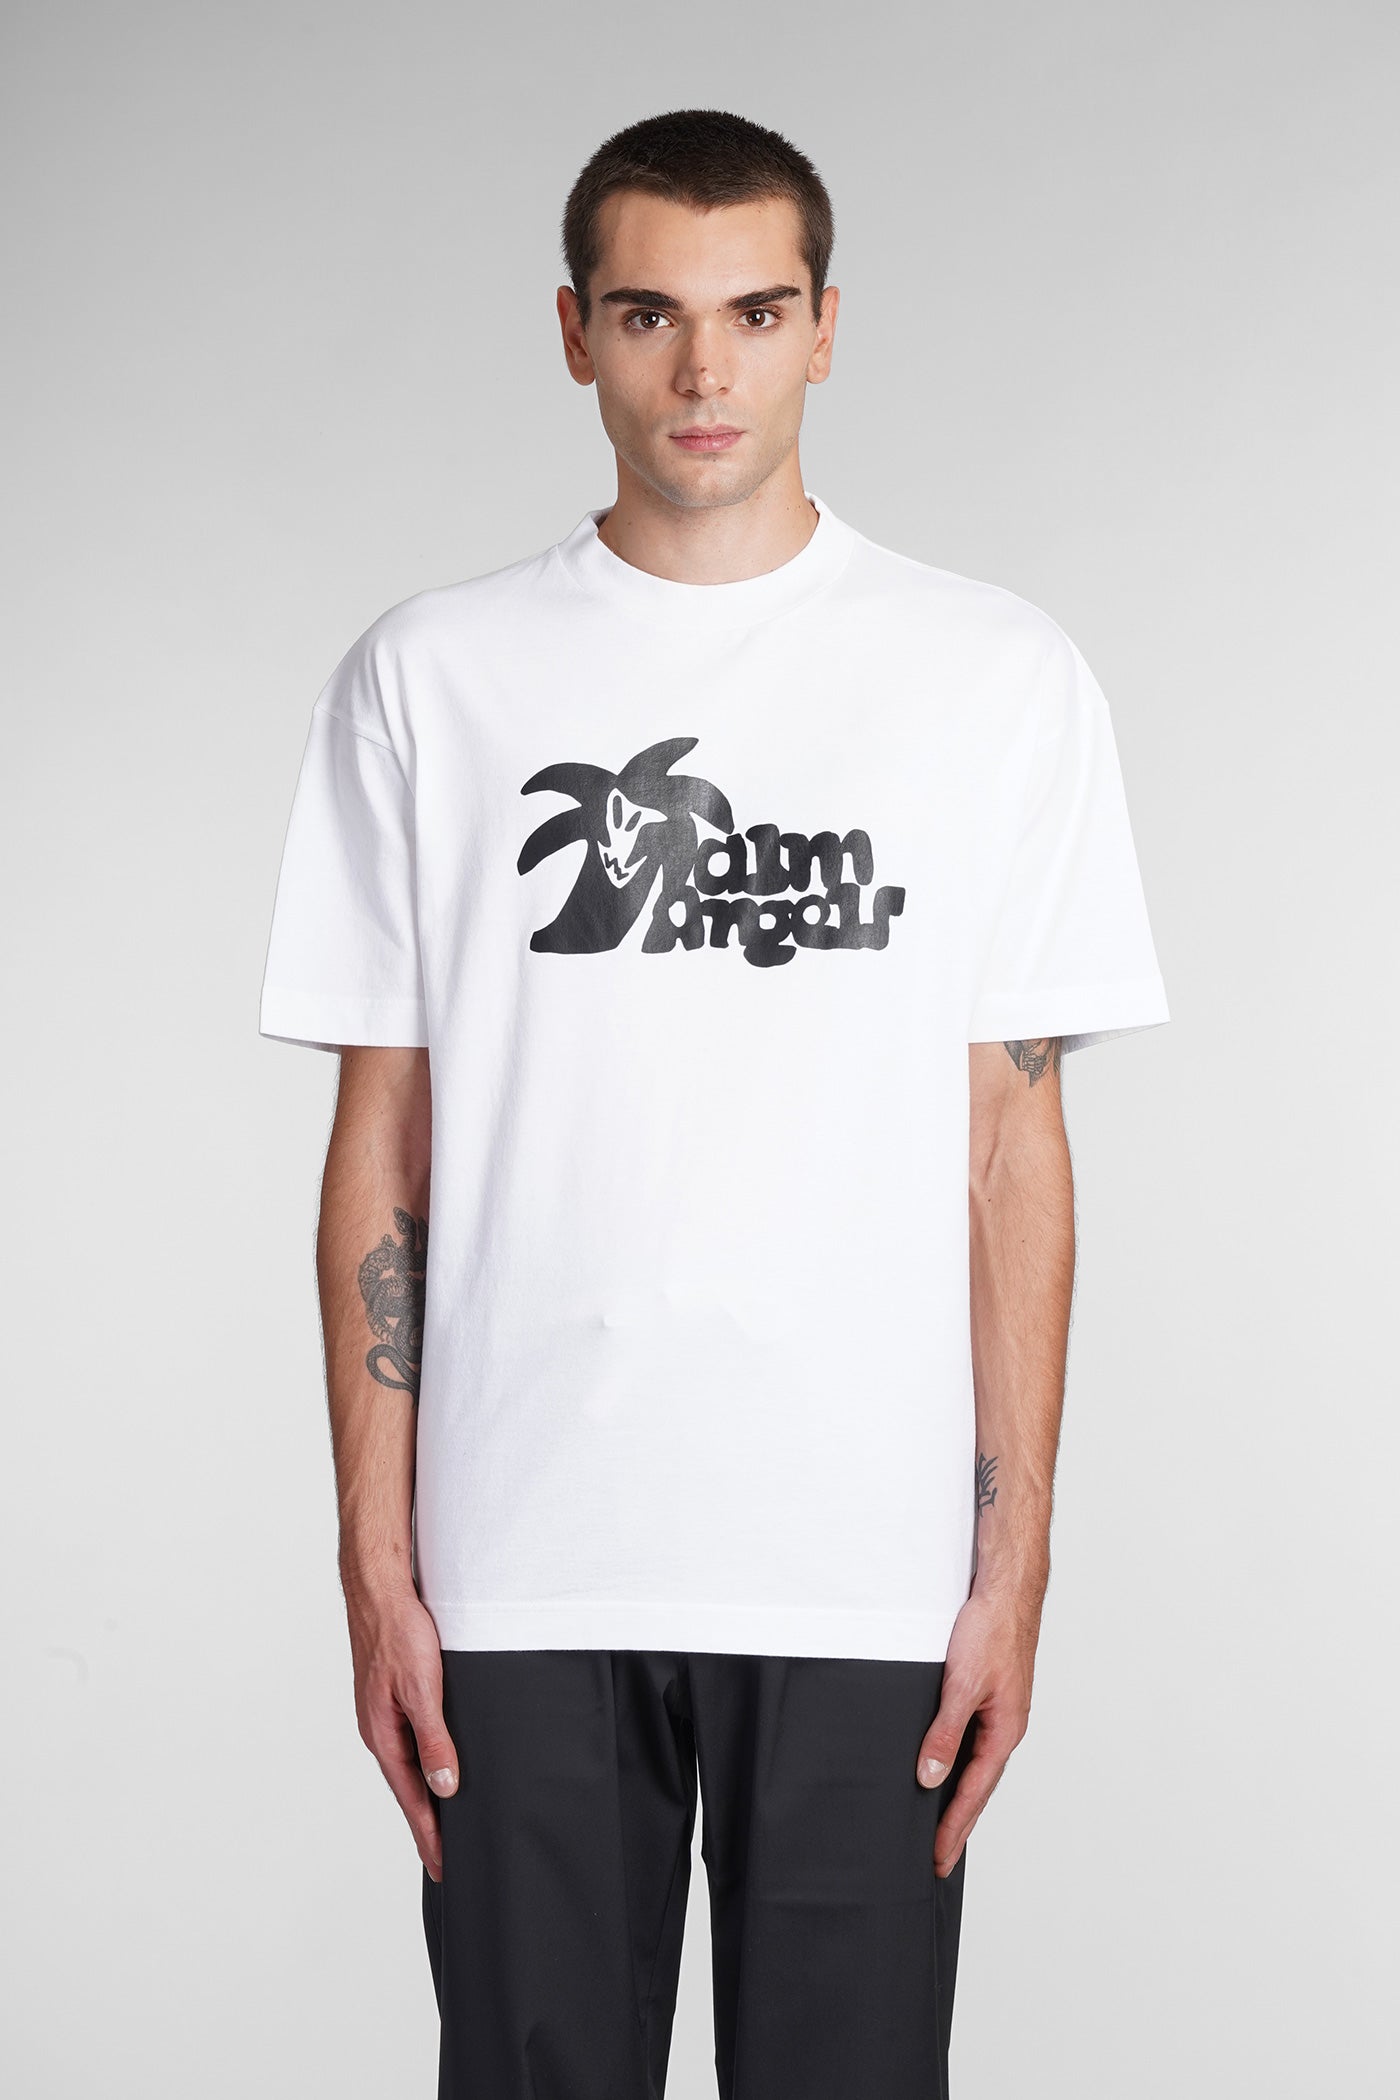 Palm Angels - T-Shirt in white cotton